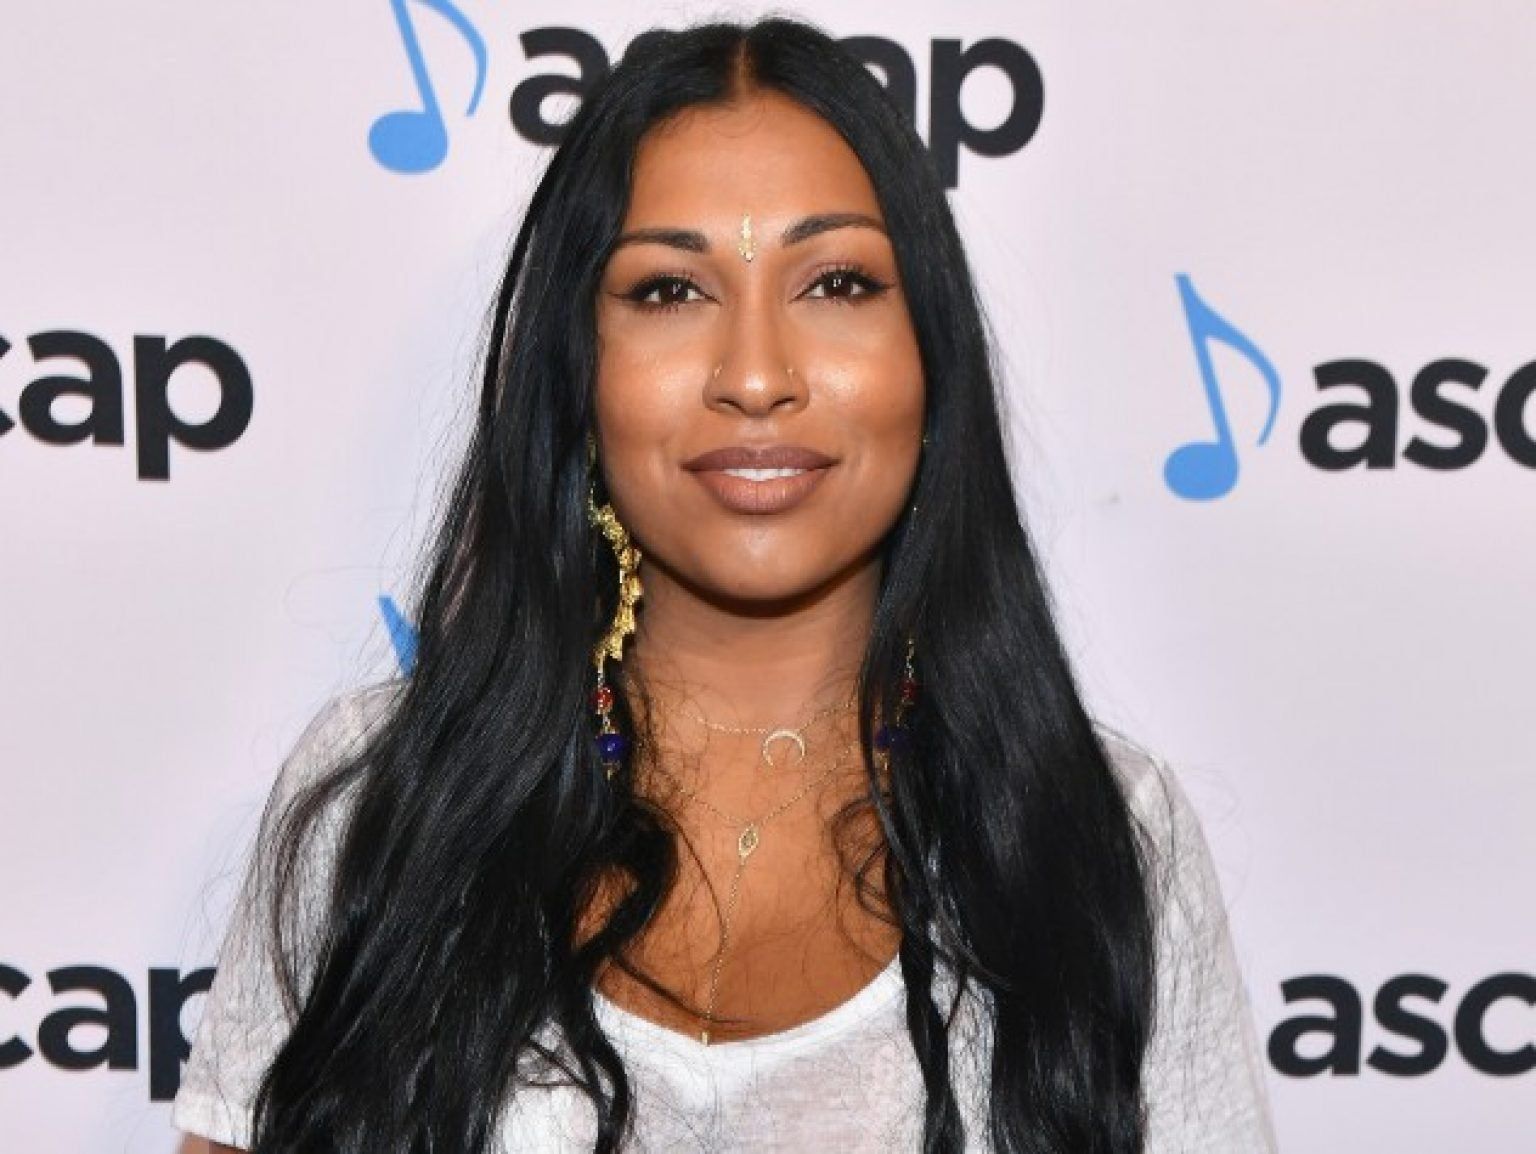 Melanie Fiona's Hair Is Now 14 Inches Shorter, And You Have To See Her Big Chop